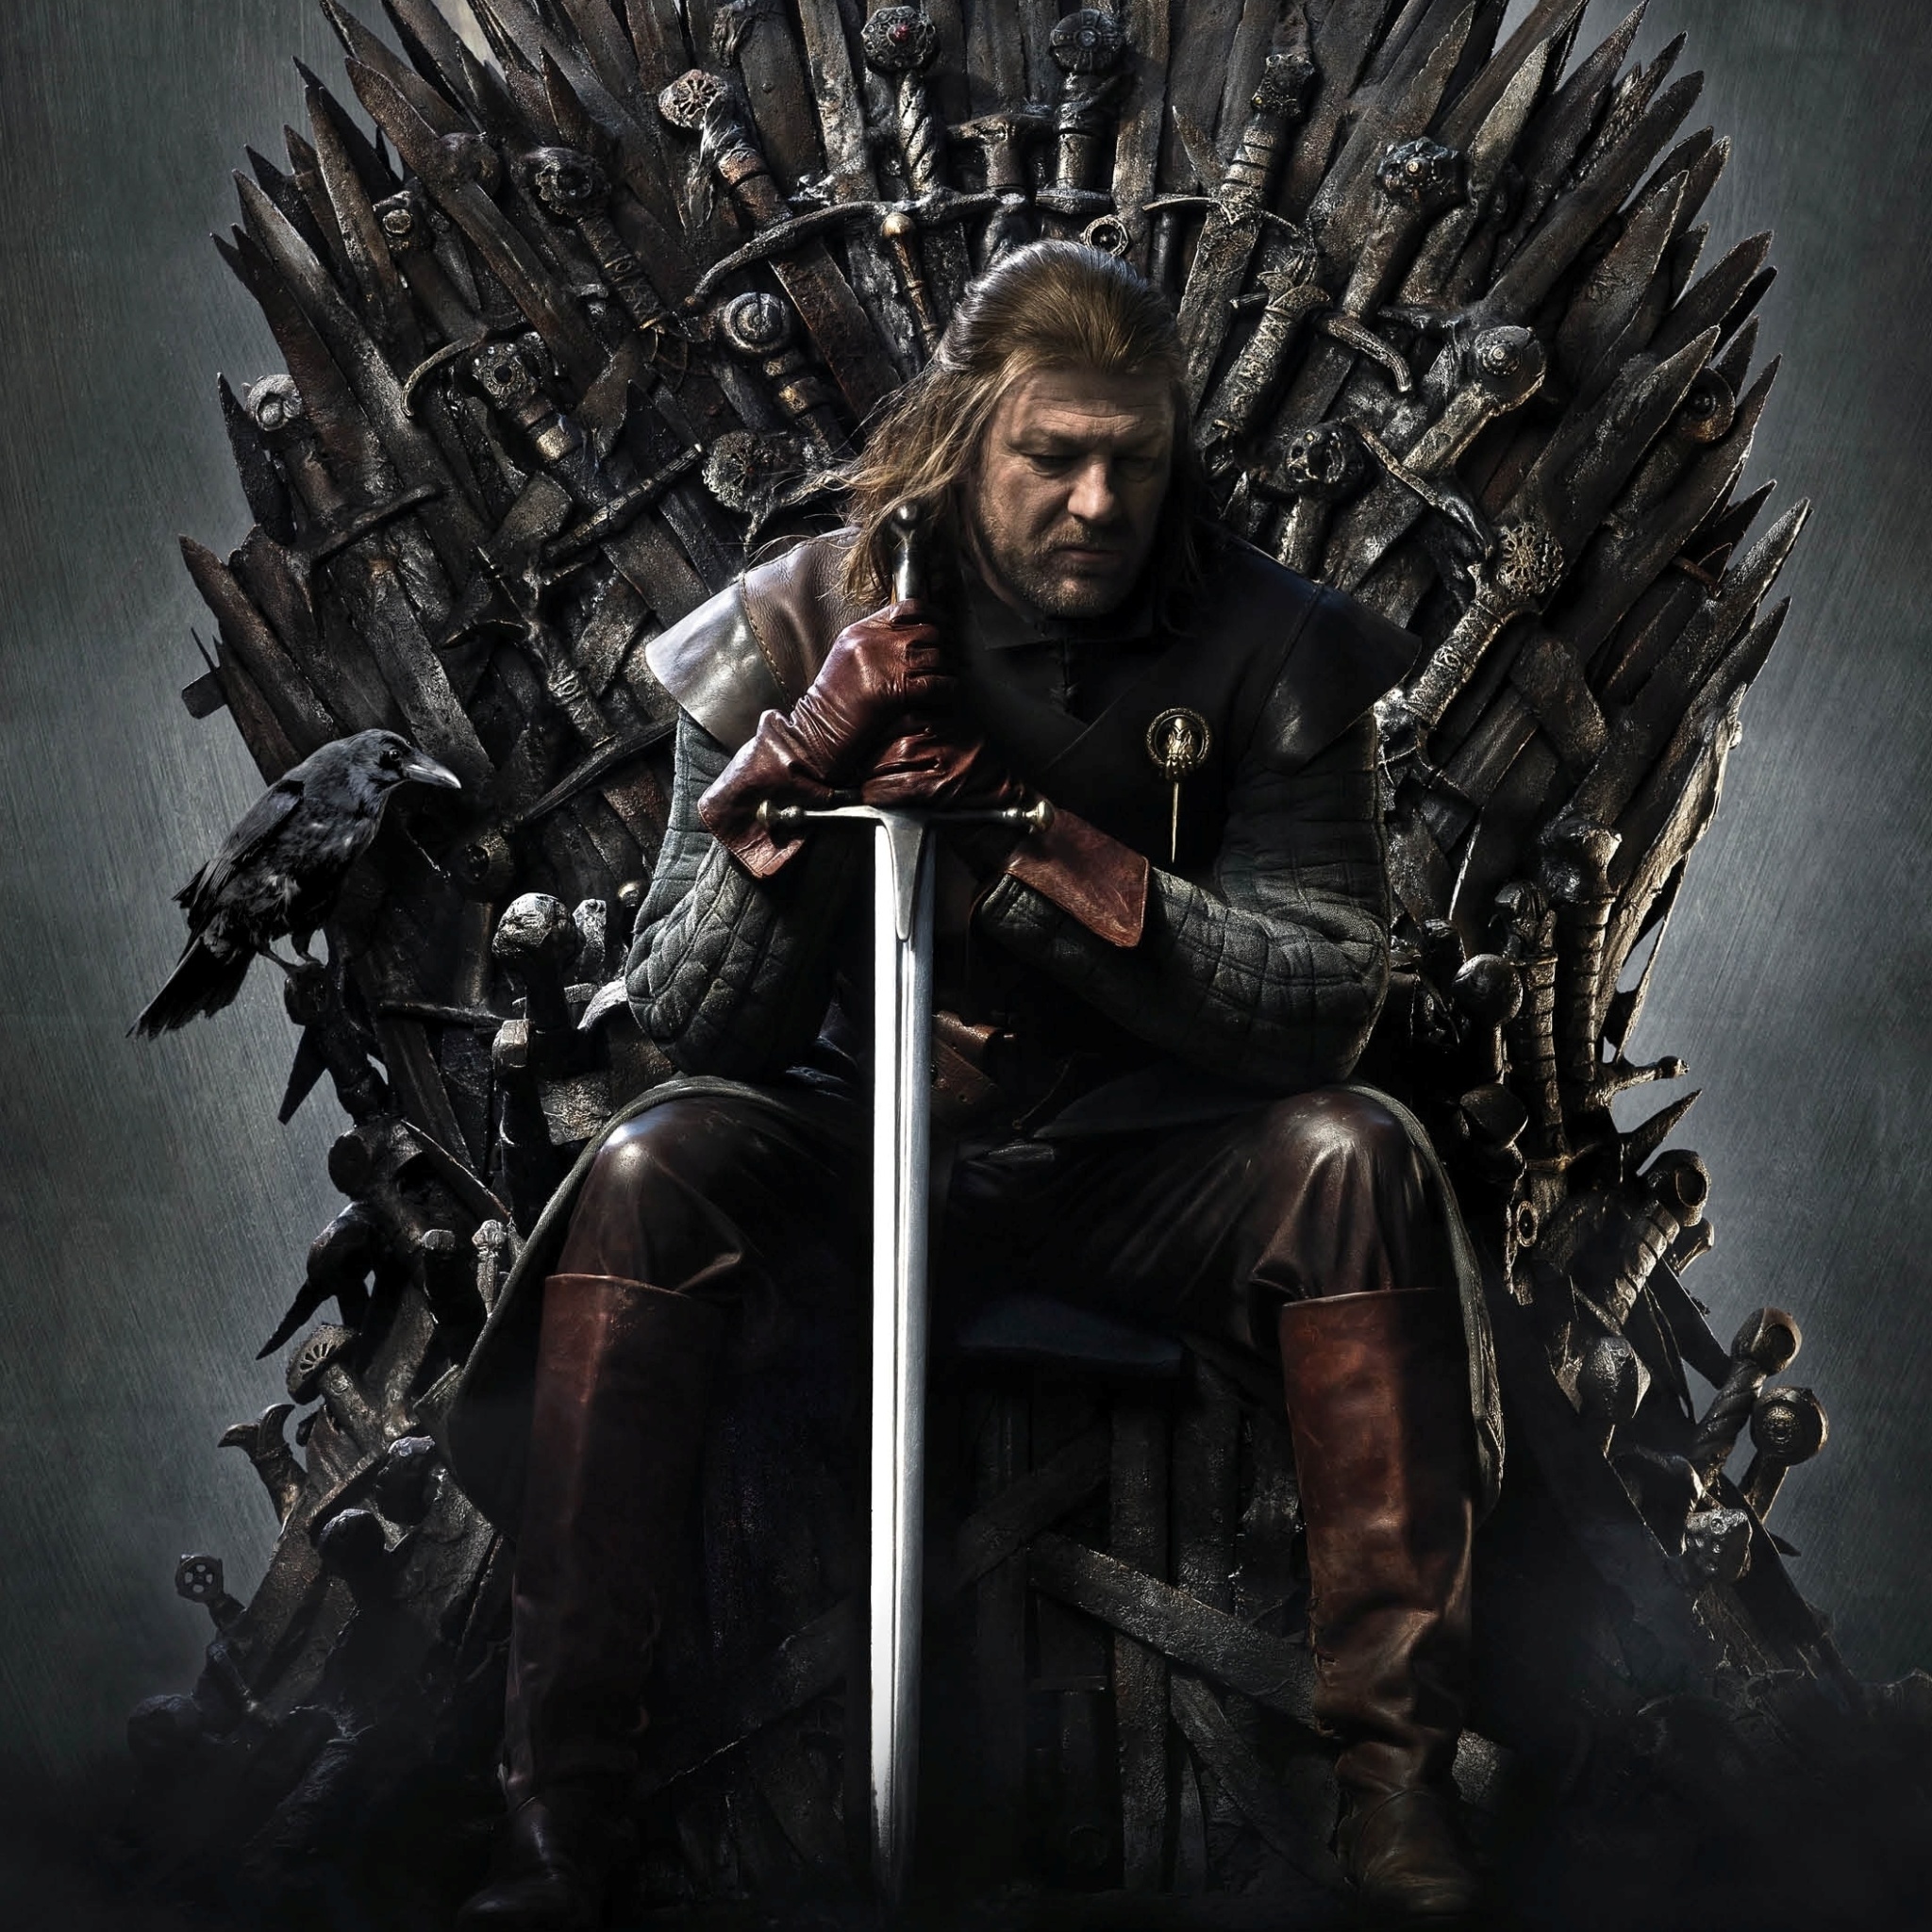 Обои Game Of Thrones A Song of Ice and Fire with Ned Star 2048x2048